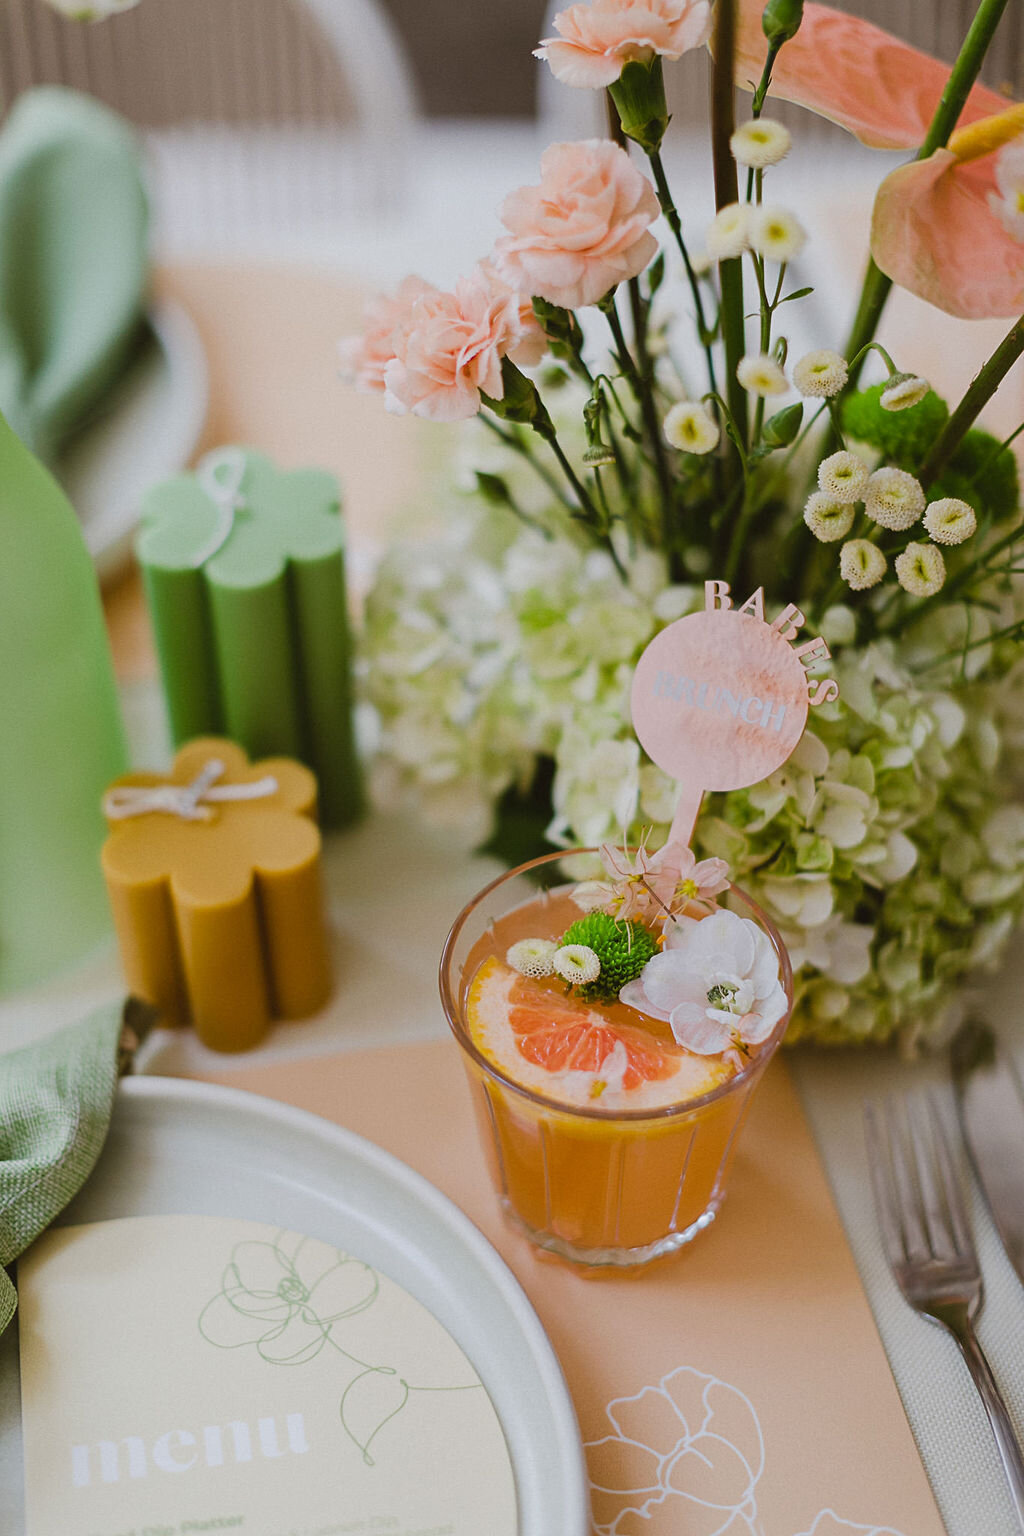 A Melbourne Babes Brunch. A tropical fruit cocktail, with fresh grapefruit and florals in the drinks. A stirrer reads "Babes Brunch" and pink and green florals are in the background next to scalloped unlit candles. 